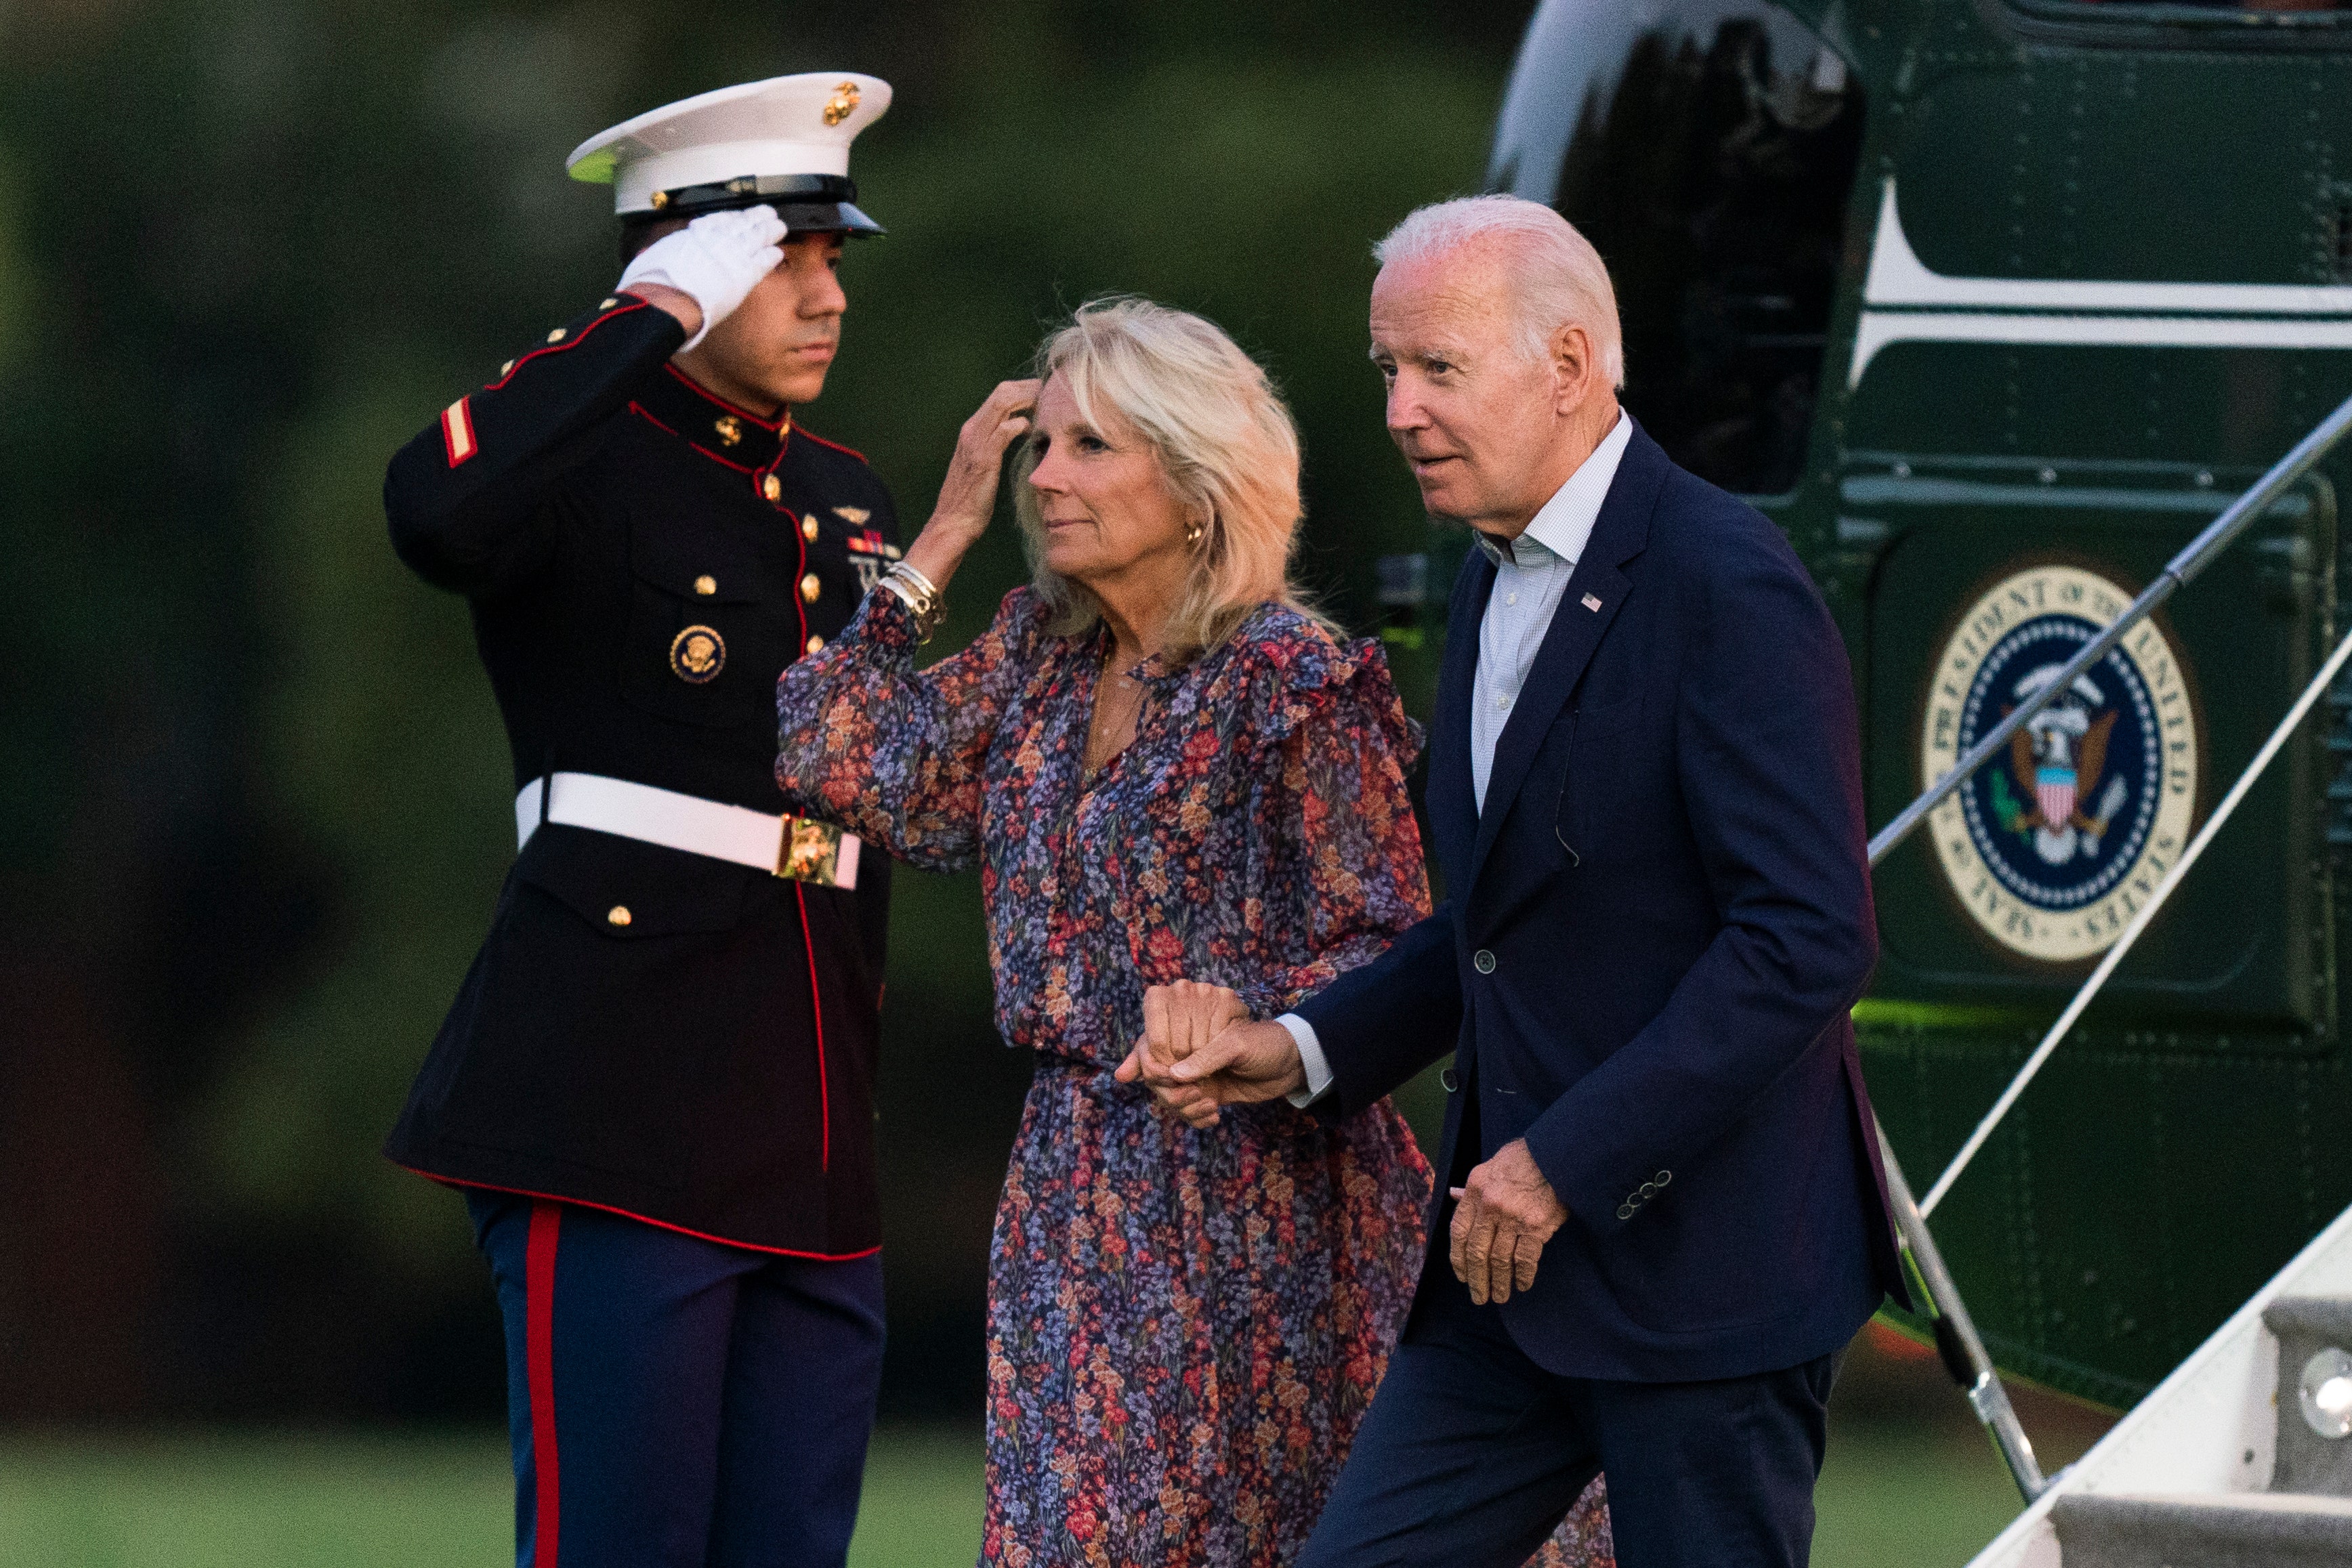 Why Biden’s winning hand may be too late to boost his 2024 prospects